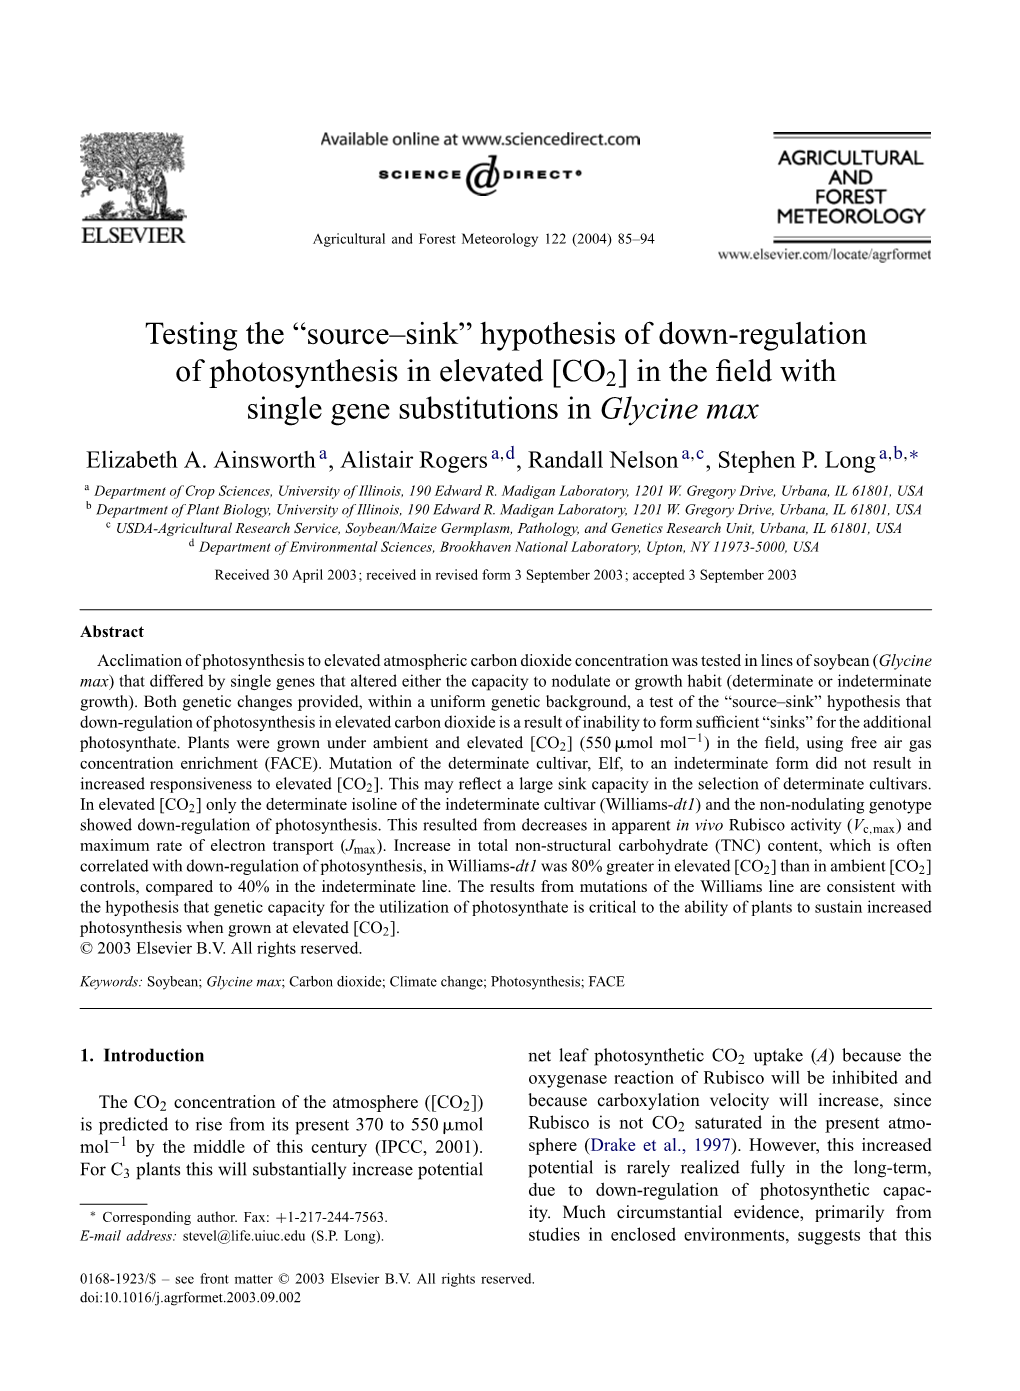 Testing the “Source–Sink” Hypothesis of Down-Regulation of Photosynthesis in Elevated [CO2] in the Field with Single Gene